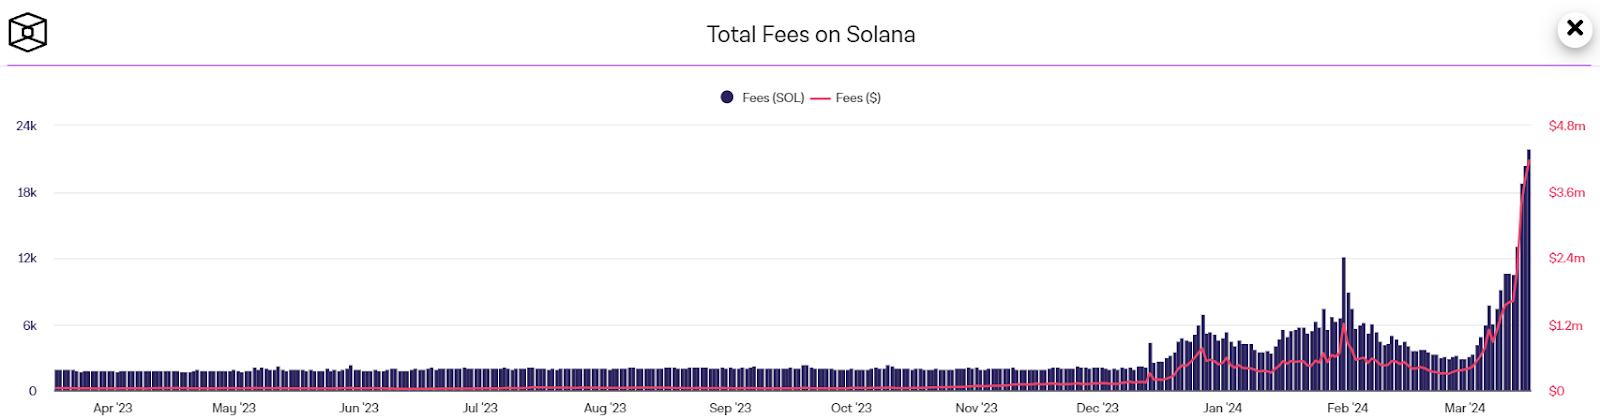 Solana’s Total Fees Touch New All-Time High As SOL Price Hits 0! Should You Expect A Correction?